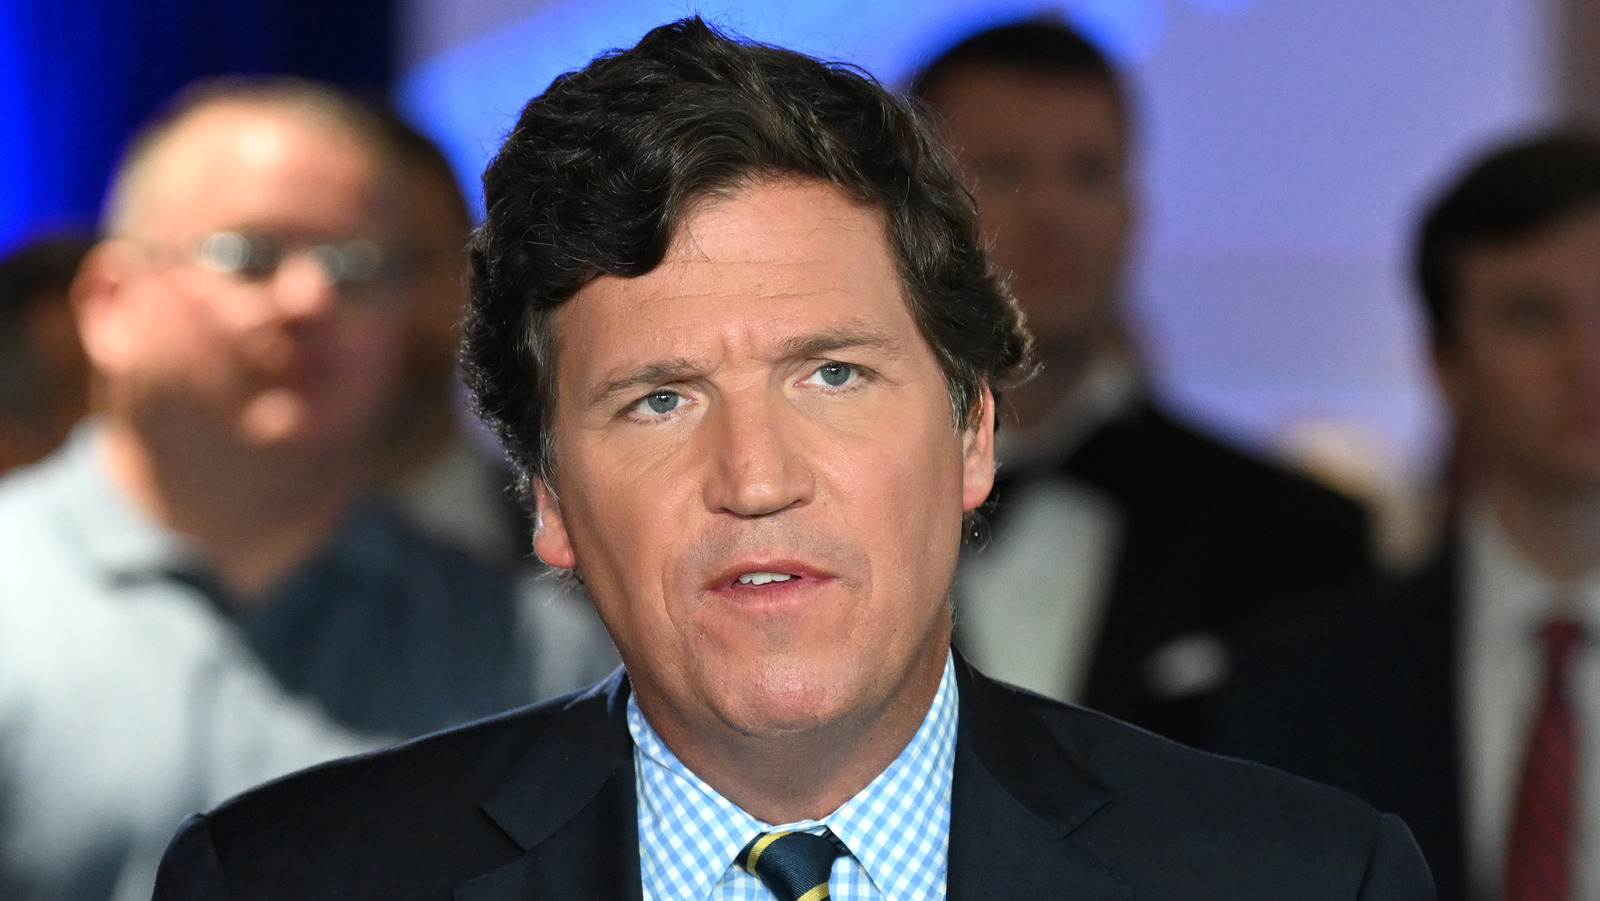 Tucker Carlson Is Finished At Fox News After Sudden Exit